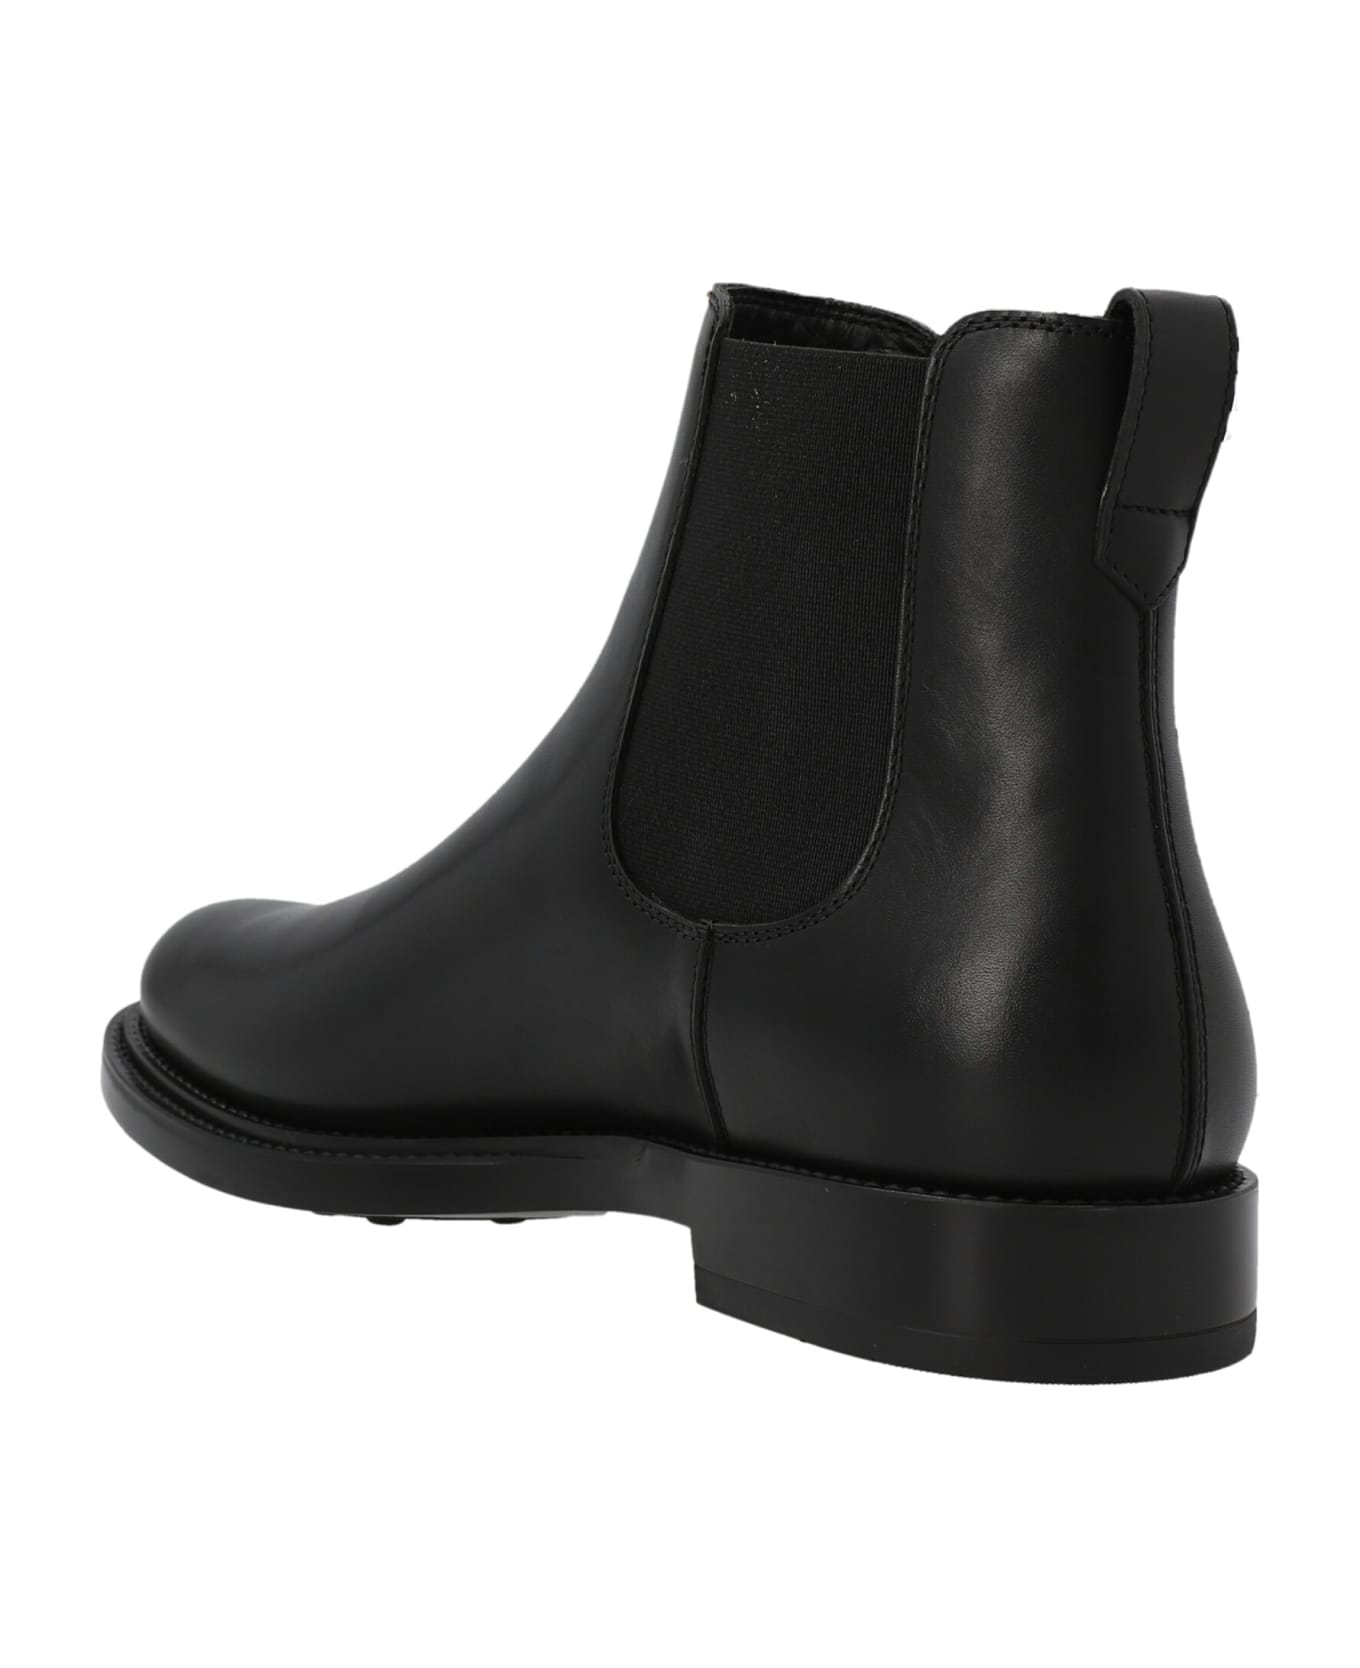 Tod's Suede Leather Chelsea Boots - Black